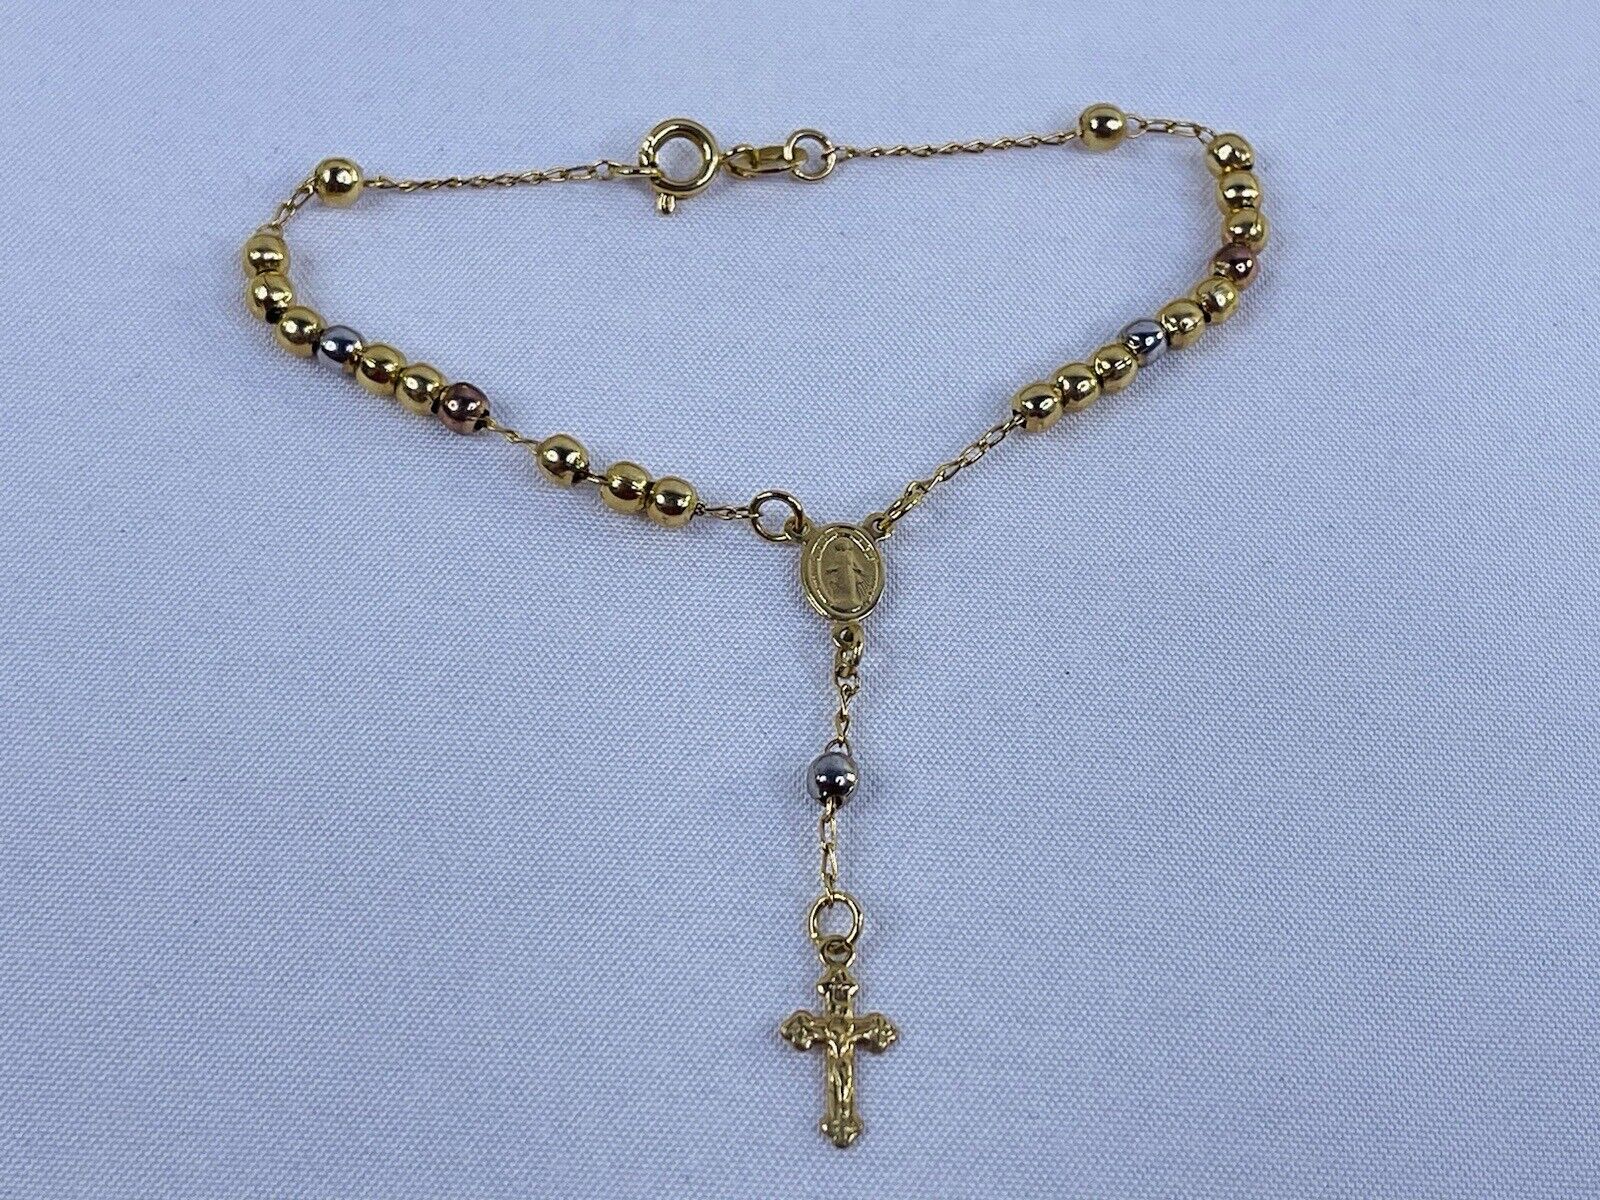 18K Plumb Gold Small Bracelet Charm Cross, Stamped , Tested.